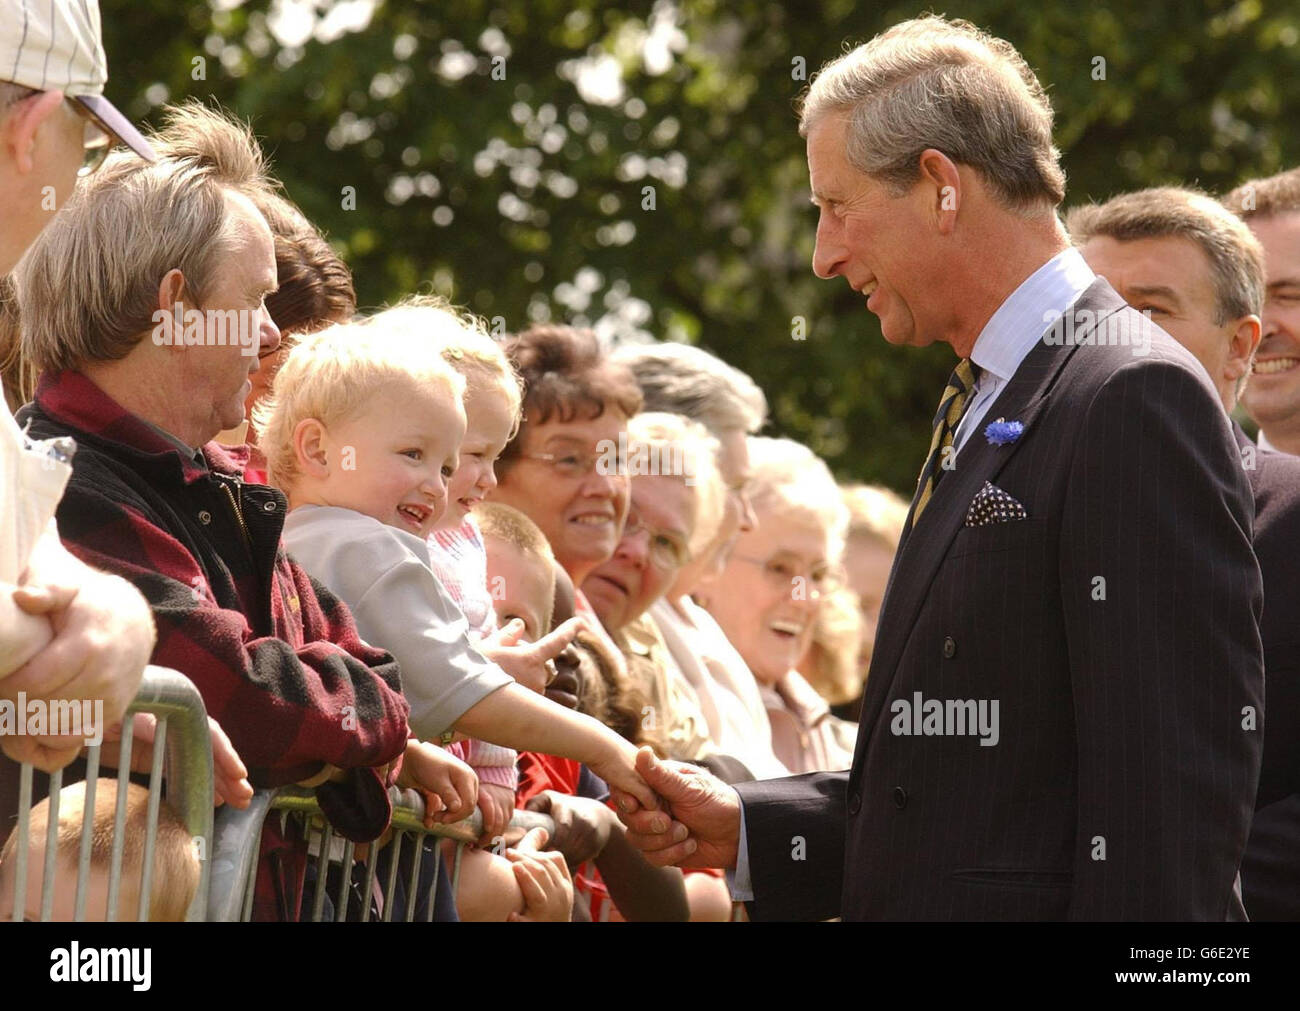 The Prince of Wales is greeted by wellwishers as he arrives at the Sighthill Youth Centre in Glasgow, during a tour of Scotland. * During the visit to the housing estate - one of the most deprived in the country - the Prince was shown what efforts have been made to overcome the area's bad image. The Prince visited the scheme with Prince William in 2001, when the area was in the midst of racial tension following the murder of asylum seeker Firsat Dag. Stock Photo